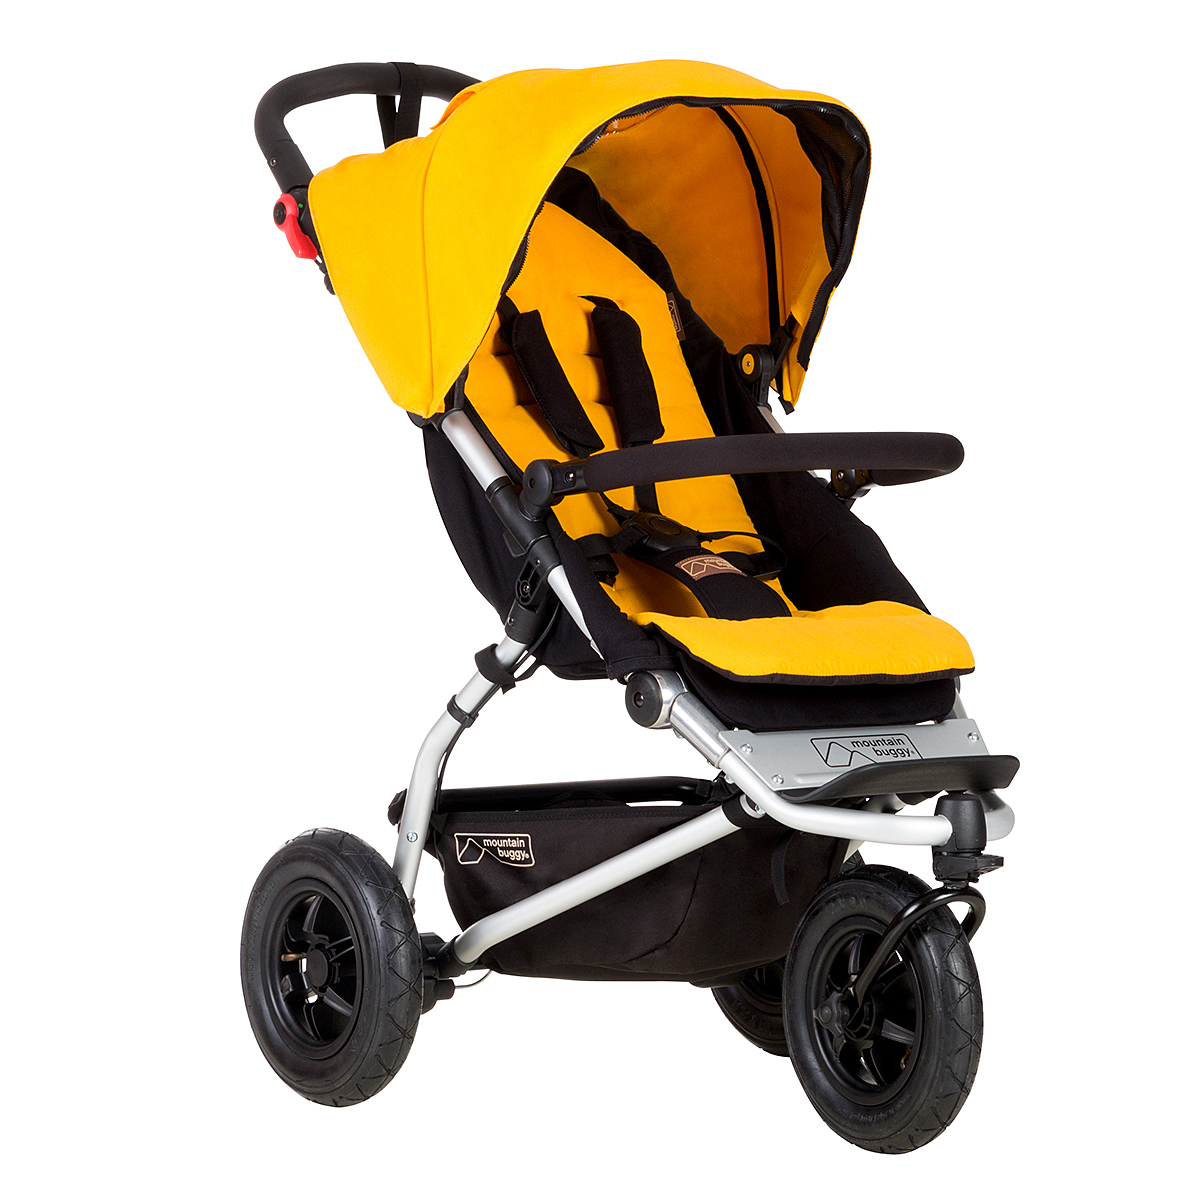 onbetaald Hoge blootstelling Dwaal Daily Baby Finds - Reviews | Best Strollers 2016 | Best Car Seats | Double  Strollers : New Mountain Buggy Swift 2015